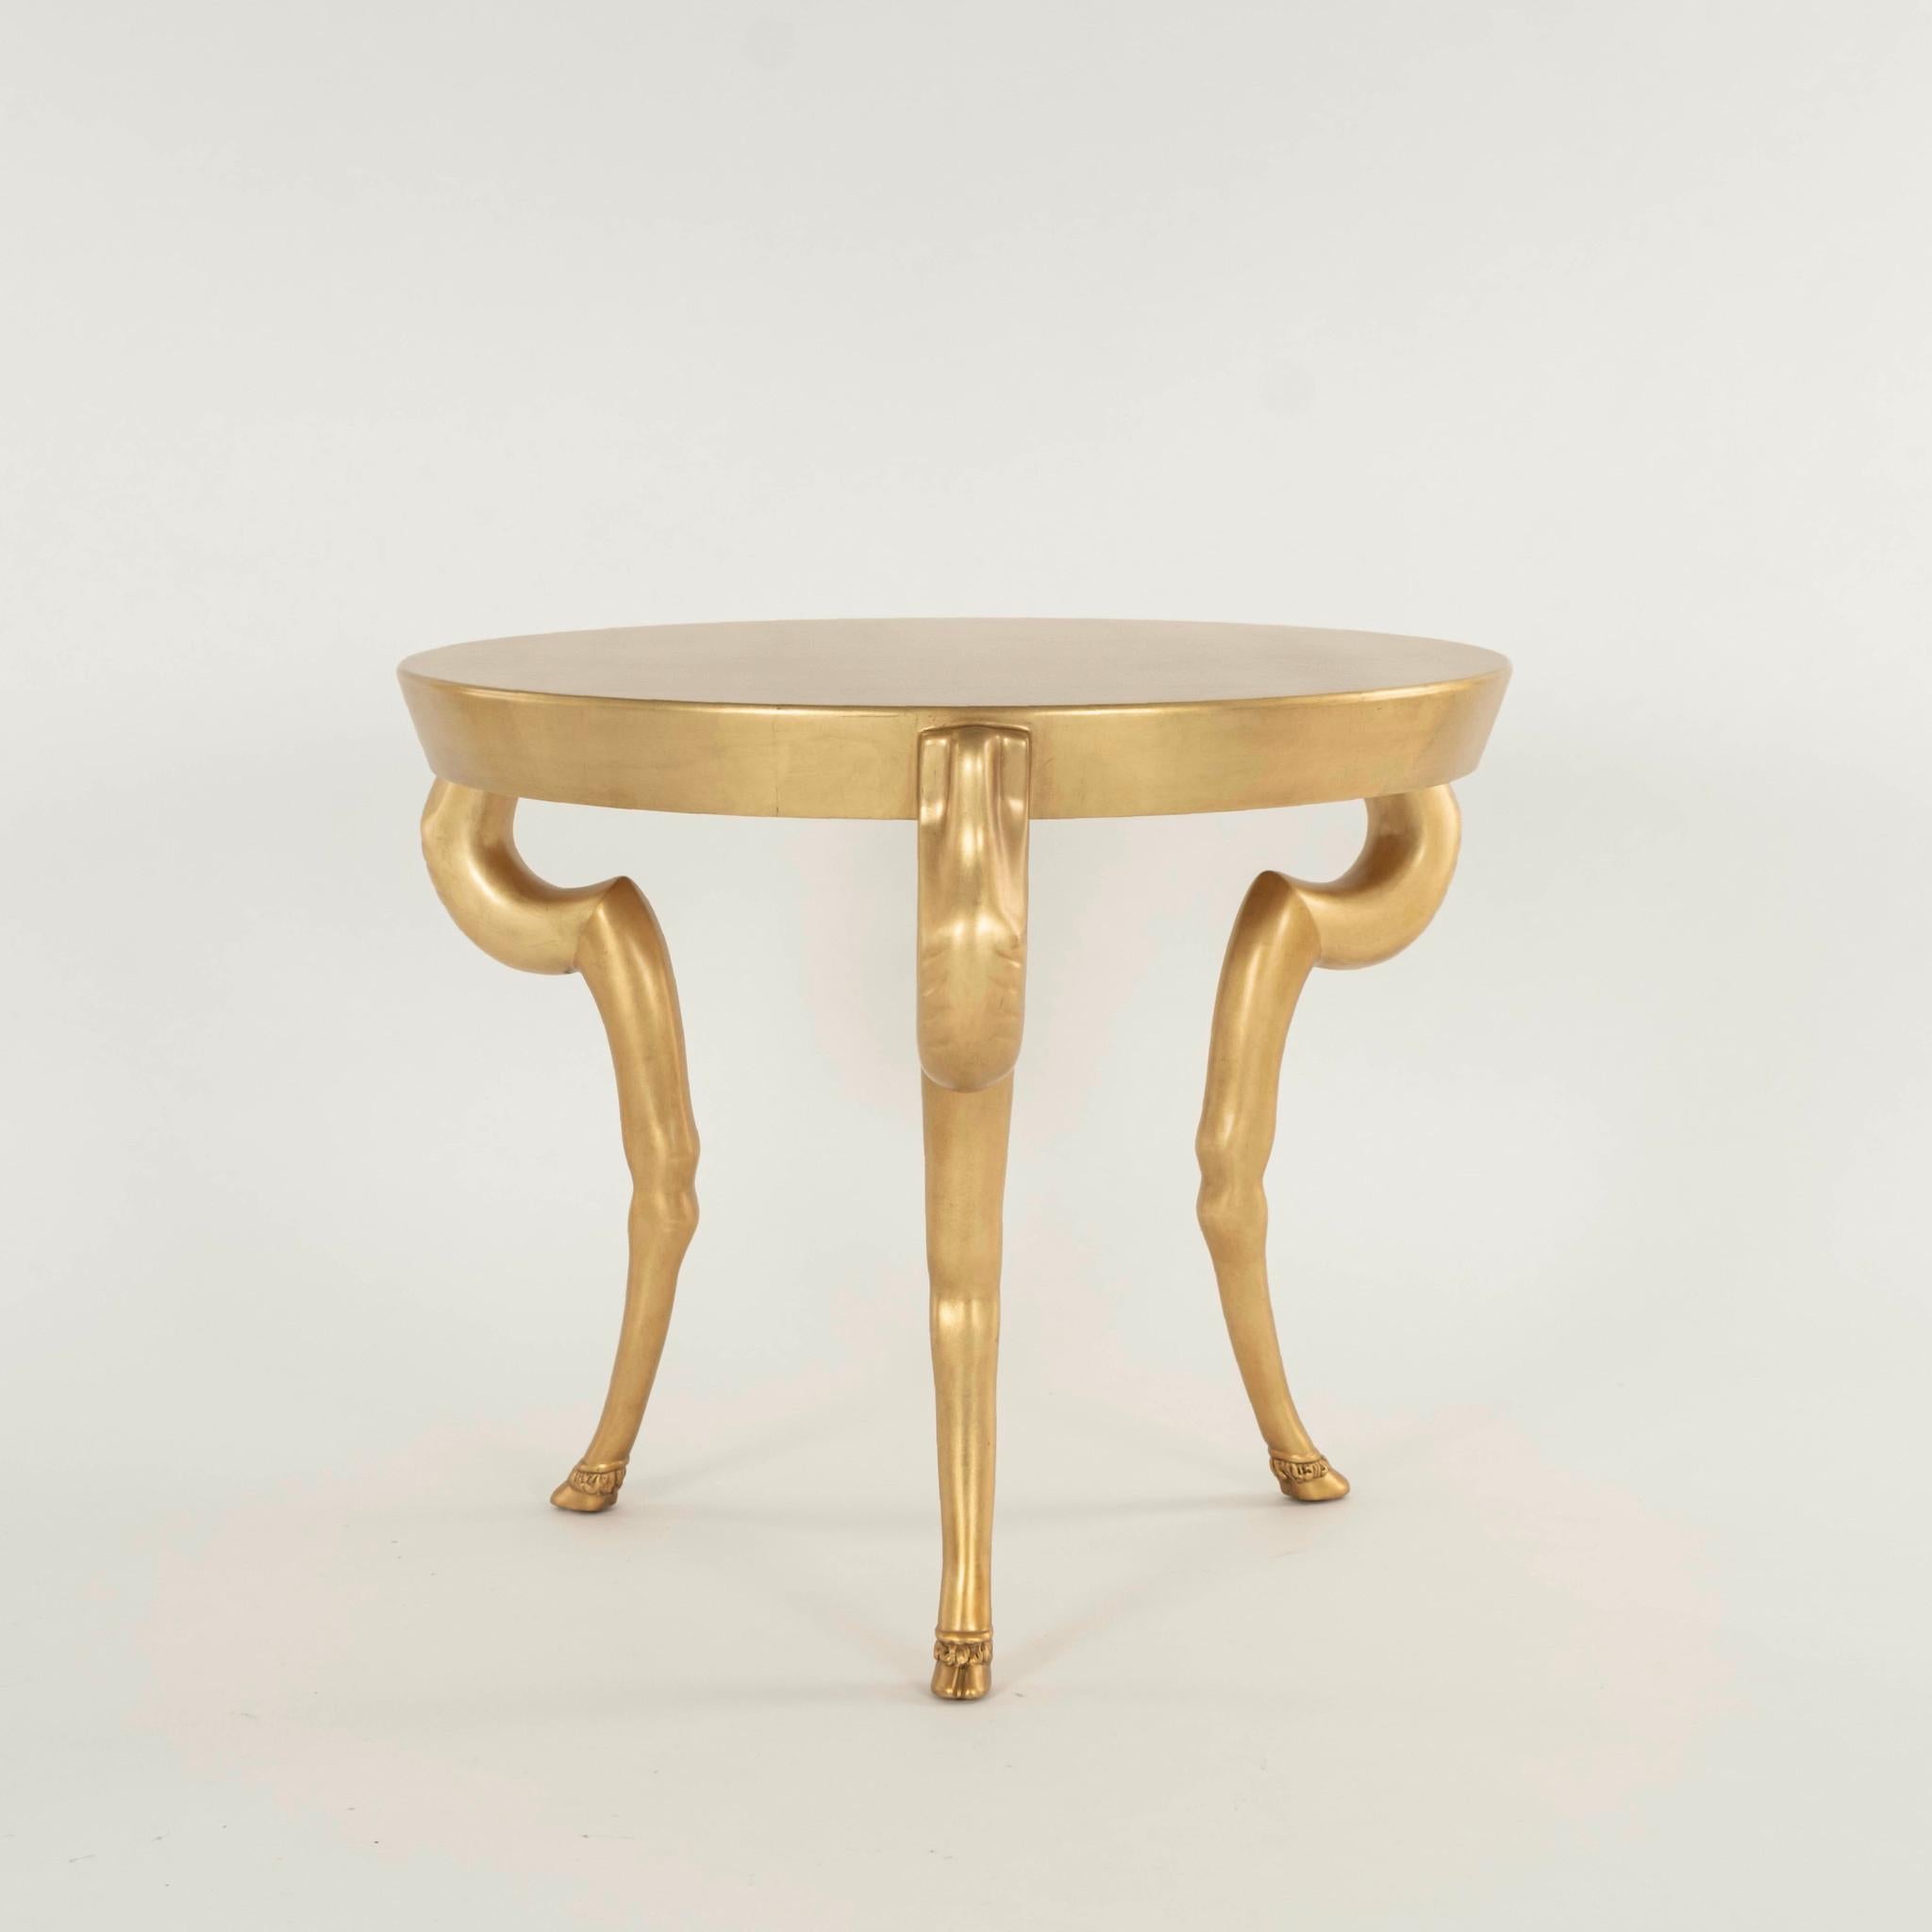 A rare and iconic hand carved gilt leaf goat leg table by Sirmos.

Sirmos. The word comes from Greek meaning “ to mold” “to shape” “to style”. Throughout the years, Sirmos has created exclusive collections of distinctive furnishings available only